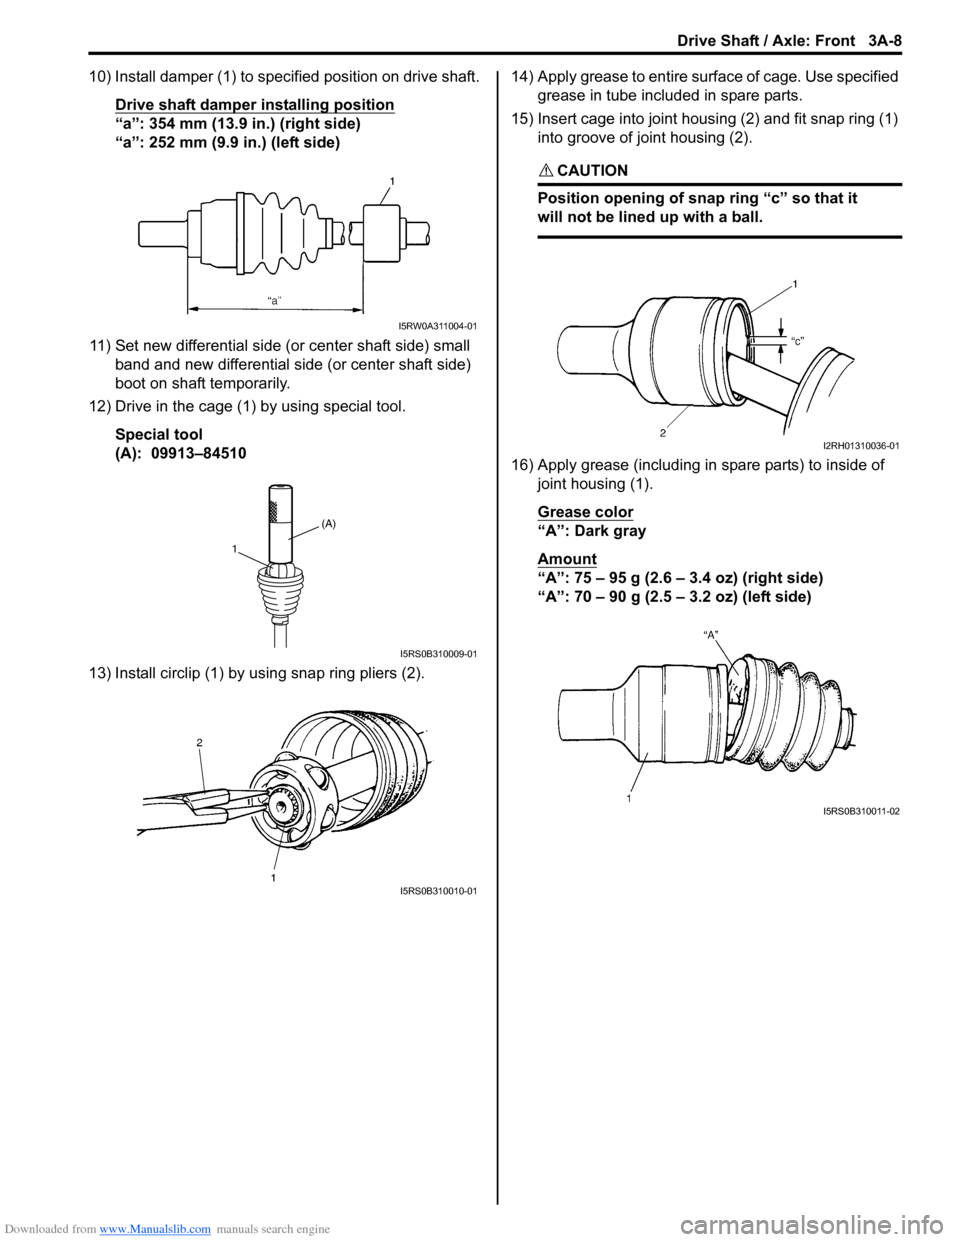 SUZUKI SX4 2006 1.G Service Workshop Manual Downloaded from www.Manualslib.com manuals search engine Drive Shaft / Axle: Front 3A-8
10) Install damper (1) to specified position on drive shaft.
Drive shaft damper installing position
“a”: 354